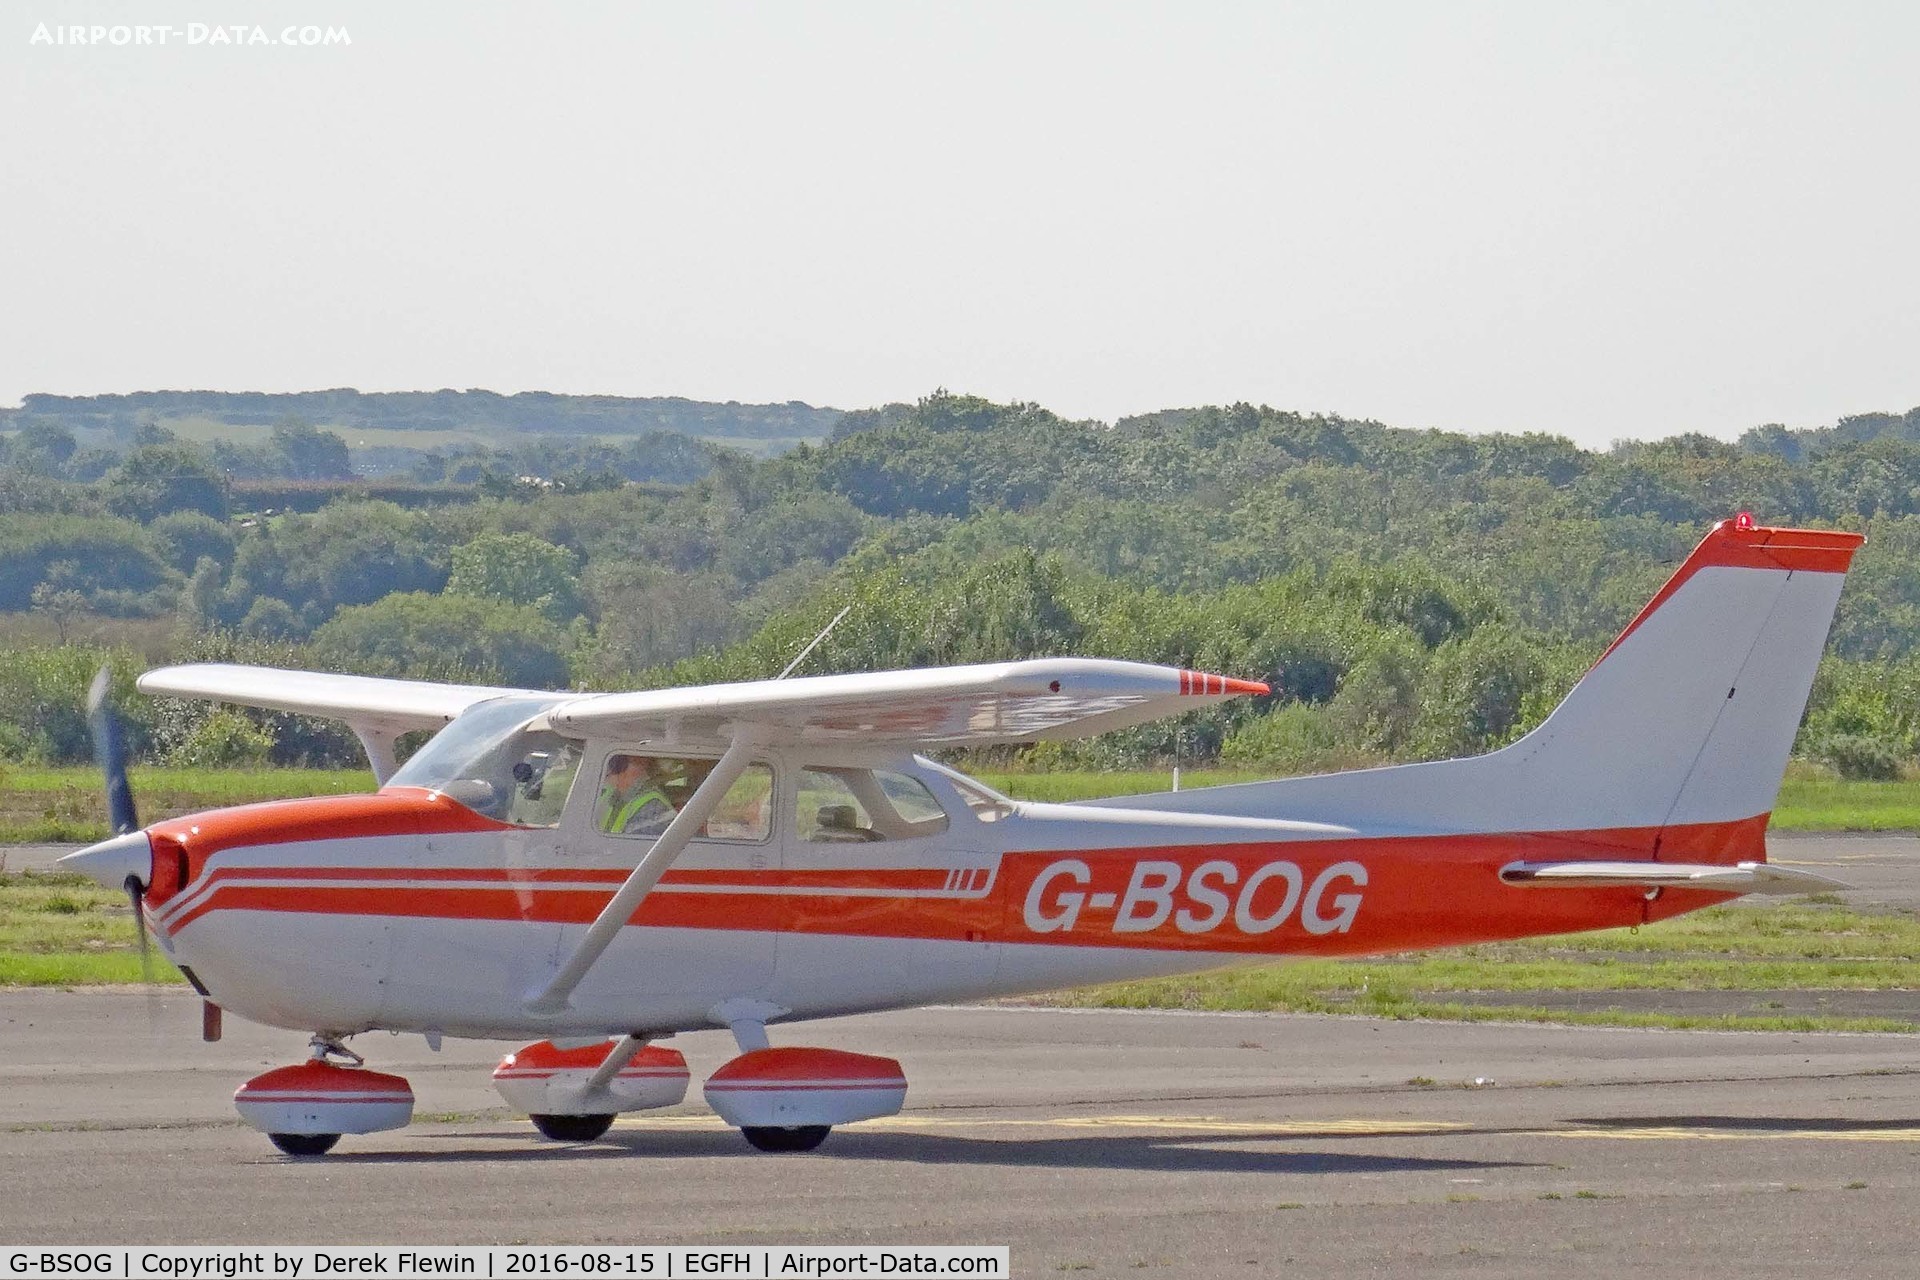 G-BSOG, 1974 Cessna 172M C/N 172-63636, Skyhawk, Staverton Gloucestershire based, previously N1508V, seen taxxing in.